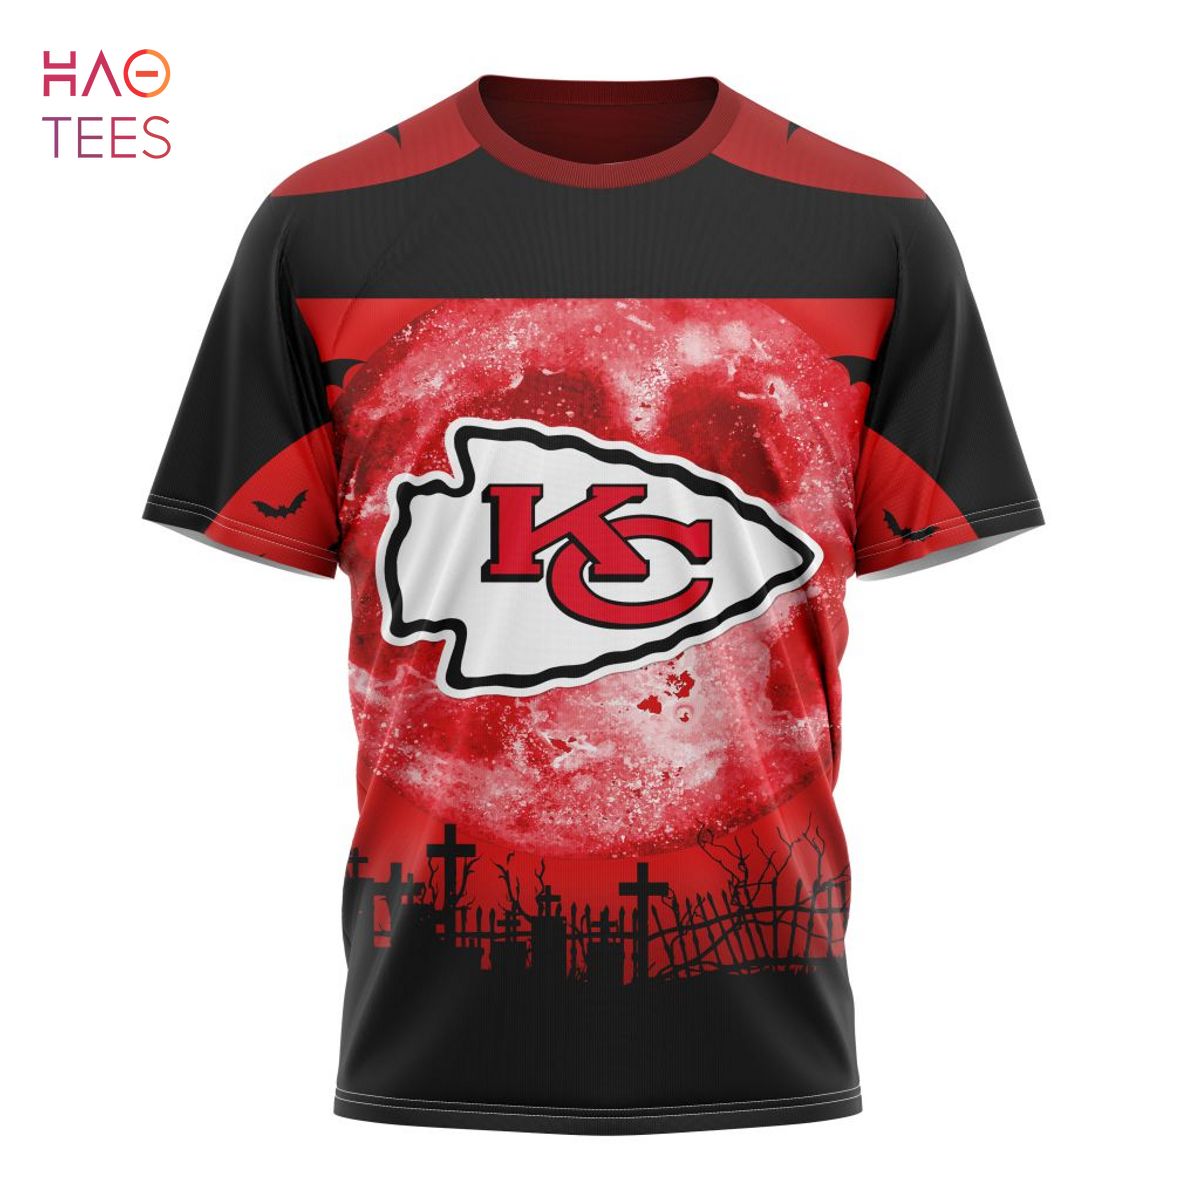 BEST NFL Kansas City Chiefs, Specialized Halloween Concepts Kits 3D Hoodie